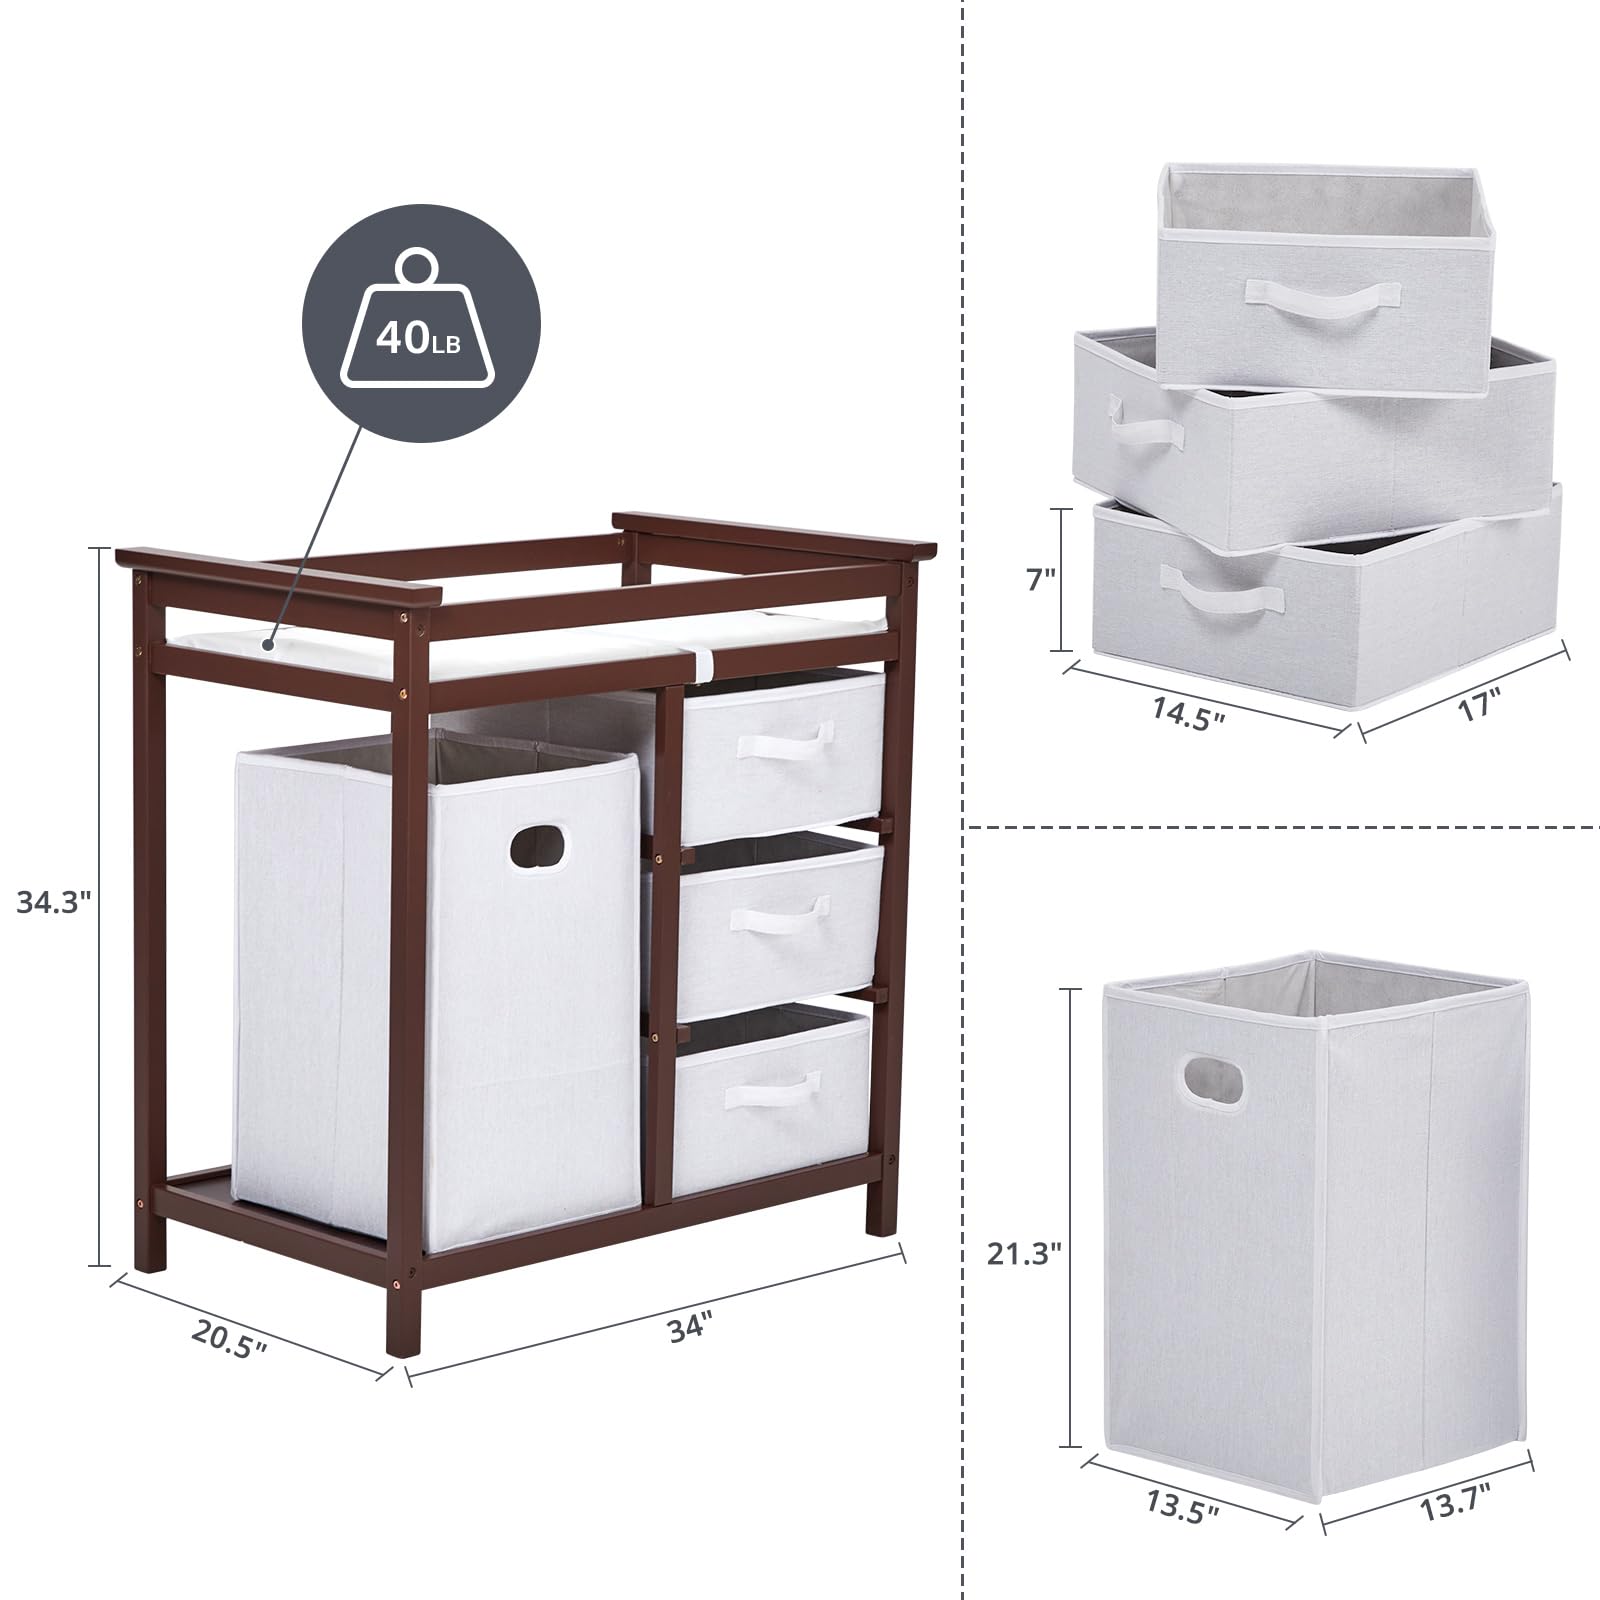 Wooden Baby Changing Table, Diaper Changing Table, Infant Diaper Changing Station Dresser with Laundry Hamper, 3 Drawer Basket and Changing Pad (Brown)